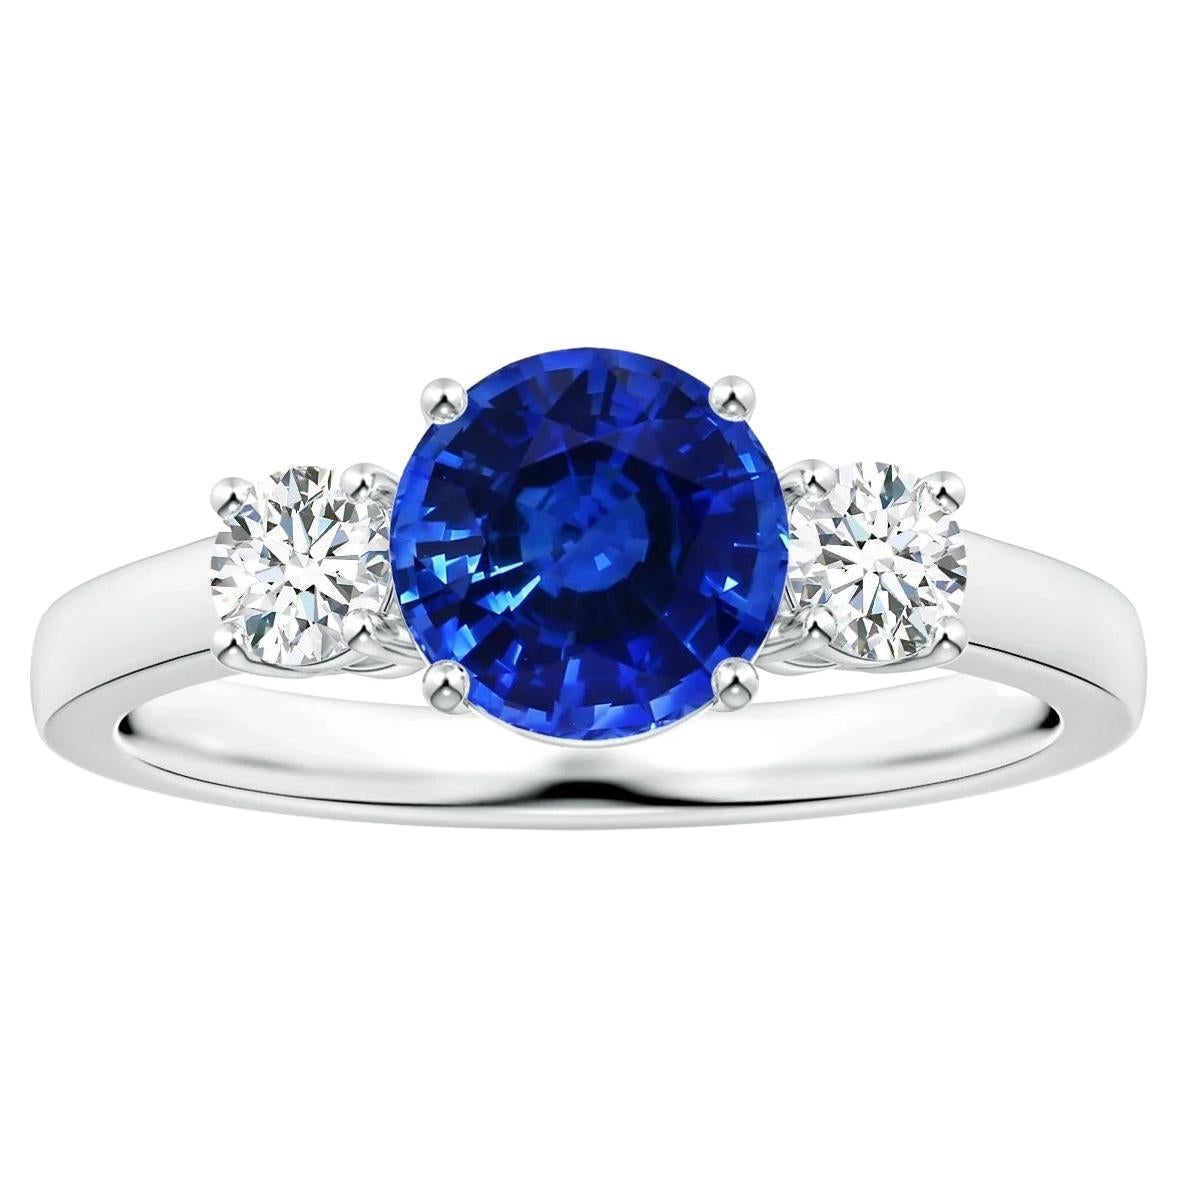 Angara Three Stone Gia Certified Blue Sapphire Ring in White Gold with Diamonds